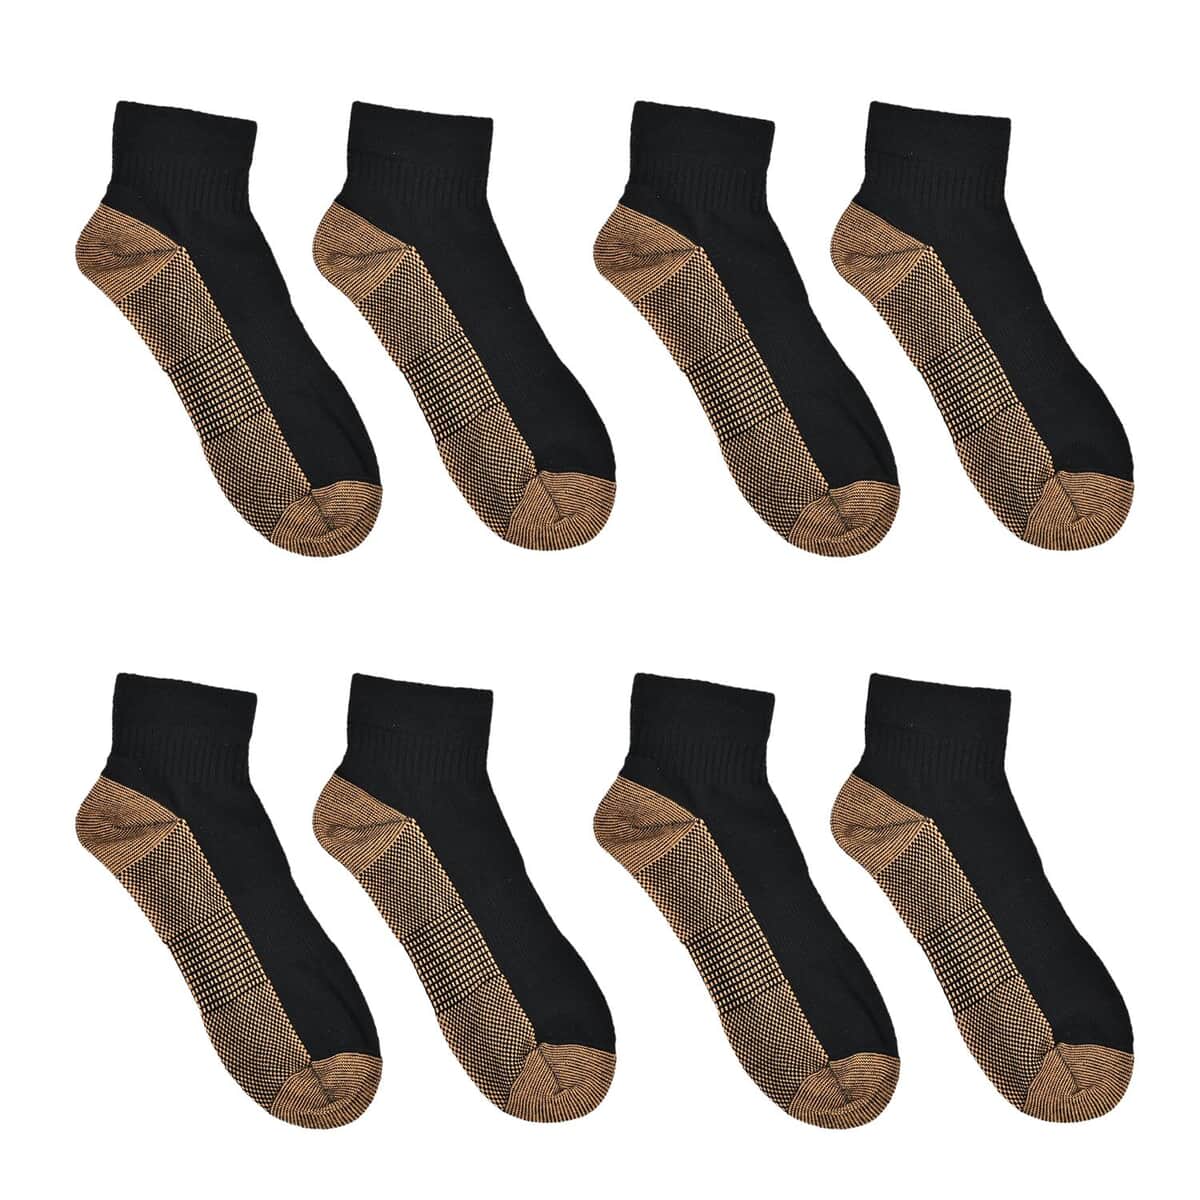 Set of 4 Pairs of Ankle Length Odor Free Copper Compression Socks For Men And Women, Premium Material Moisture Wicking Unisex Copper Infused Socks - Black (L/XL) image number 0